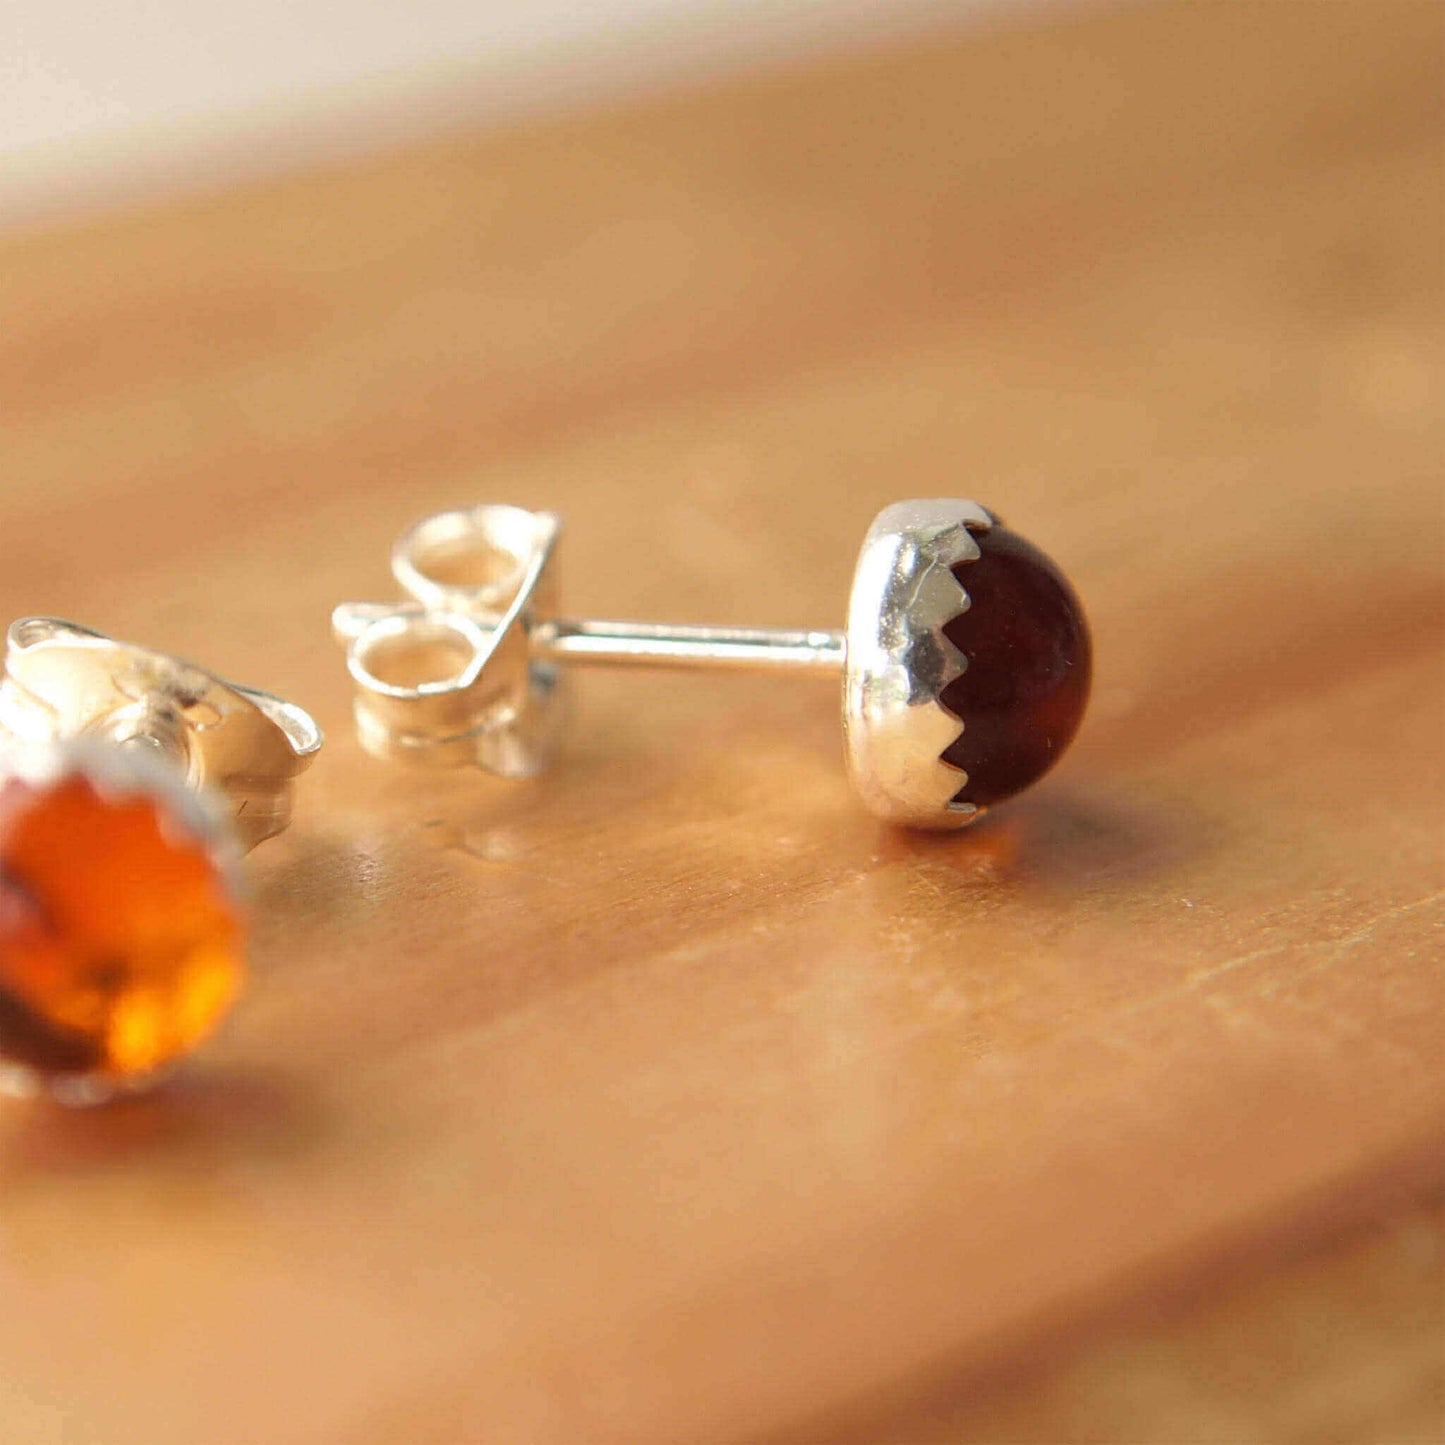 Simple silver and genuine amber gemstone studs, 5mm round with a decorative edge, handmade in Scotland by maram jewellery